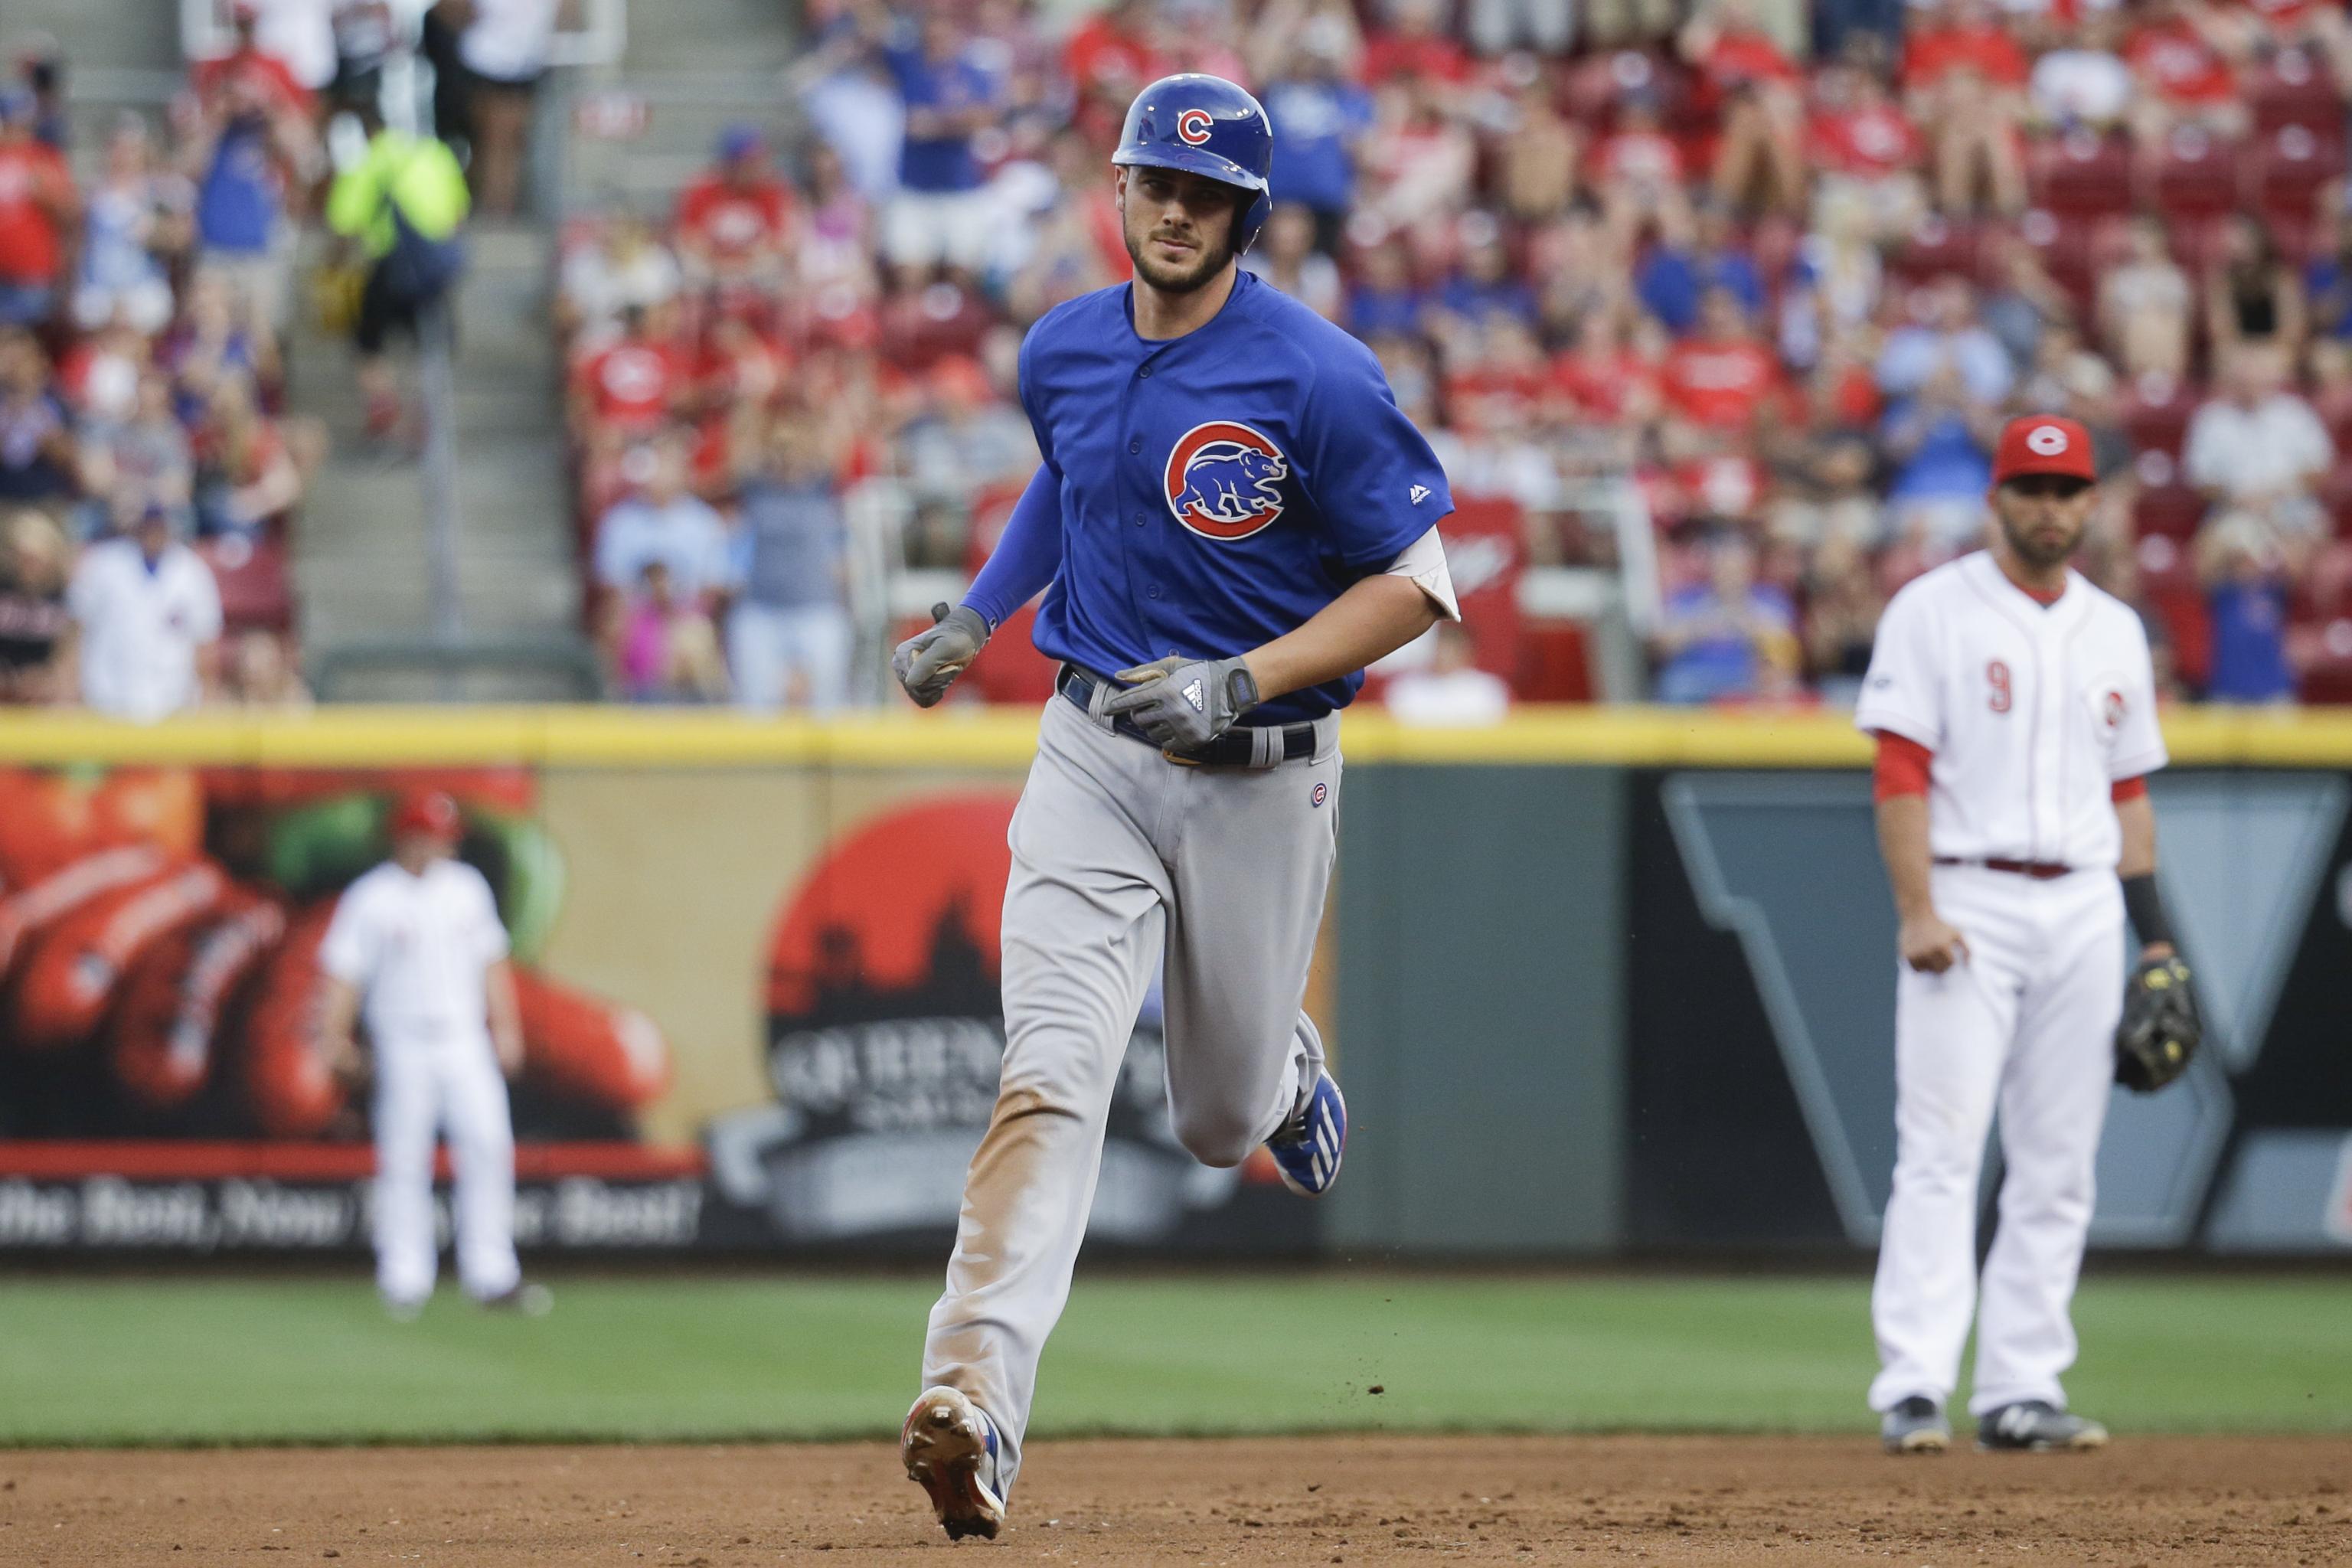 Kris Bryant News, Biography, MLB Records, Stats & Facts